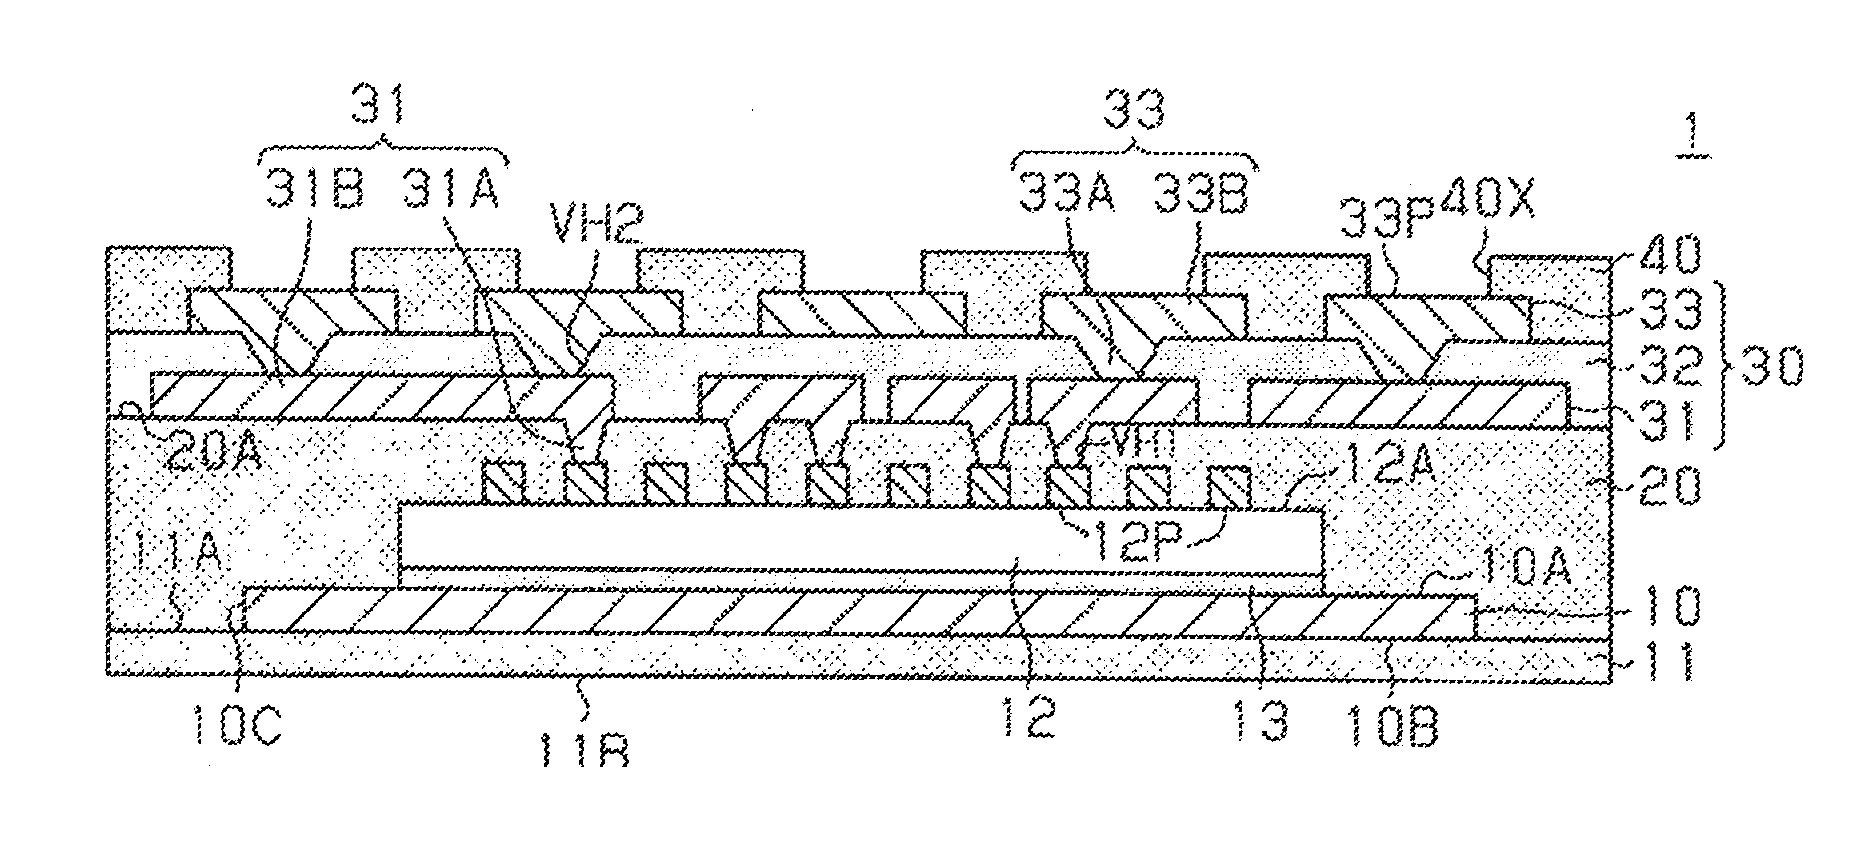 Semiconductor package, semiconductor apparatus and method for manufacturing semiconductor package